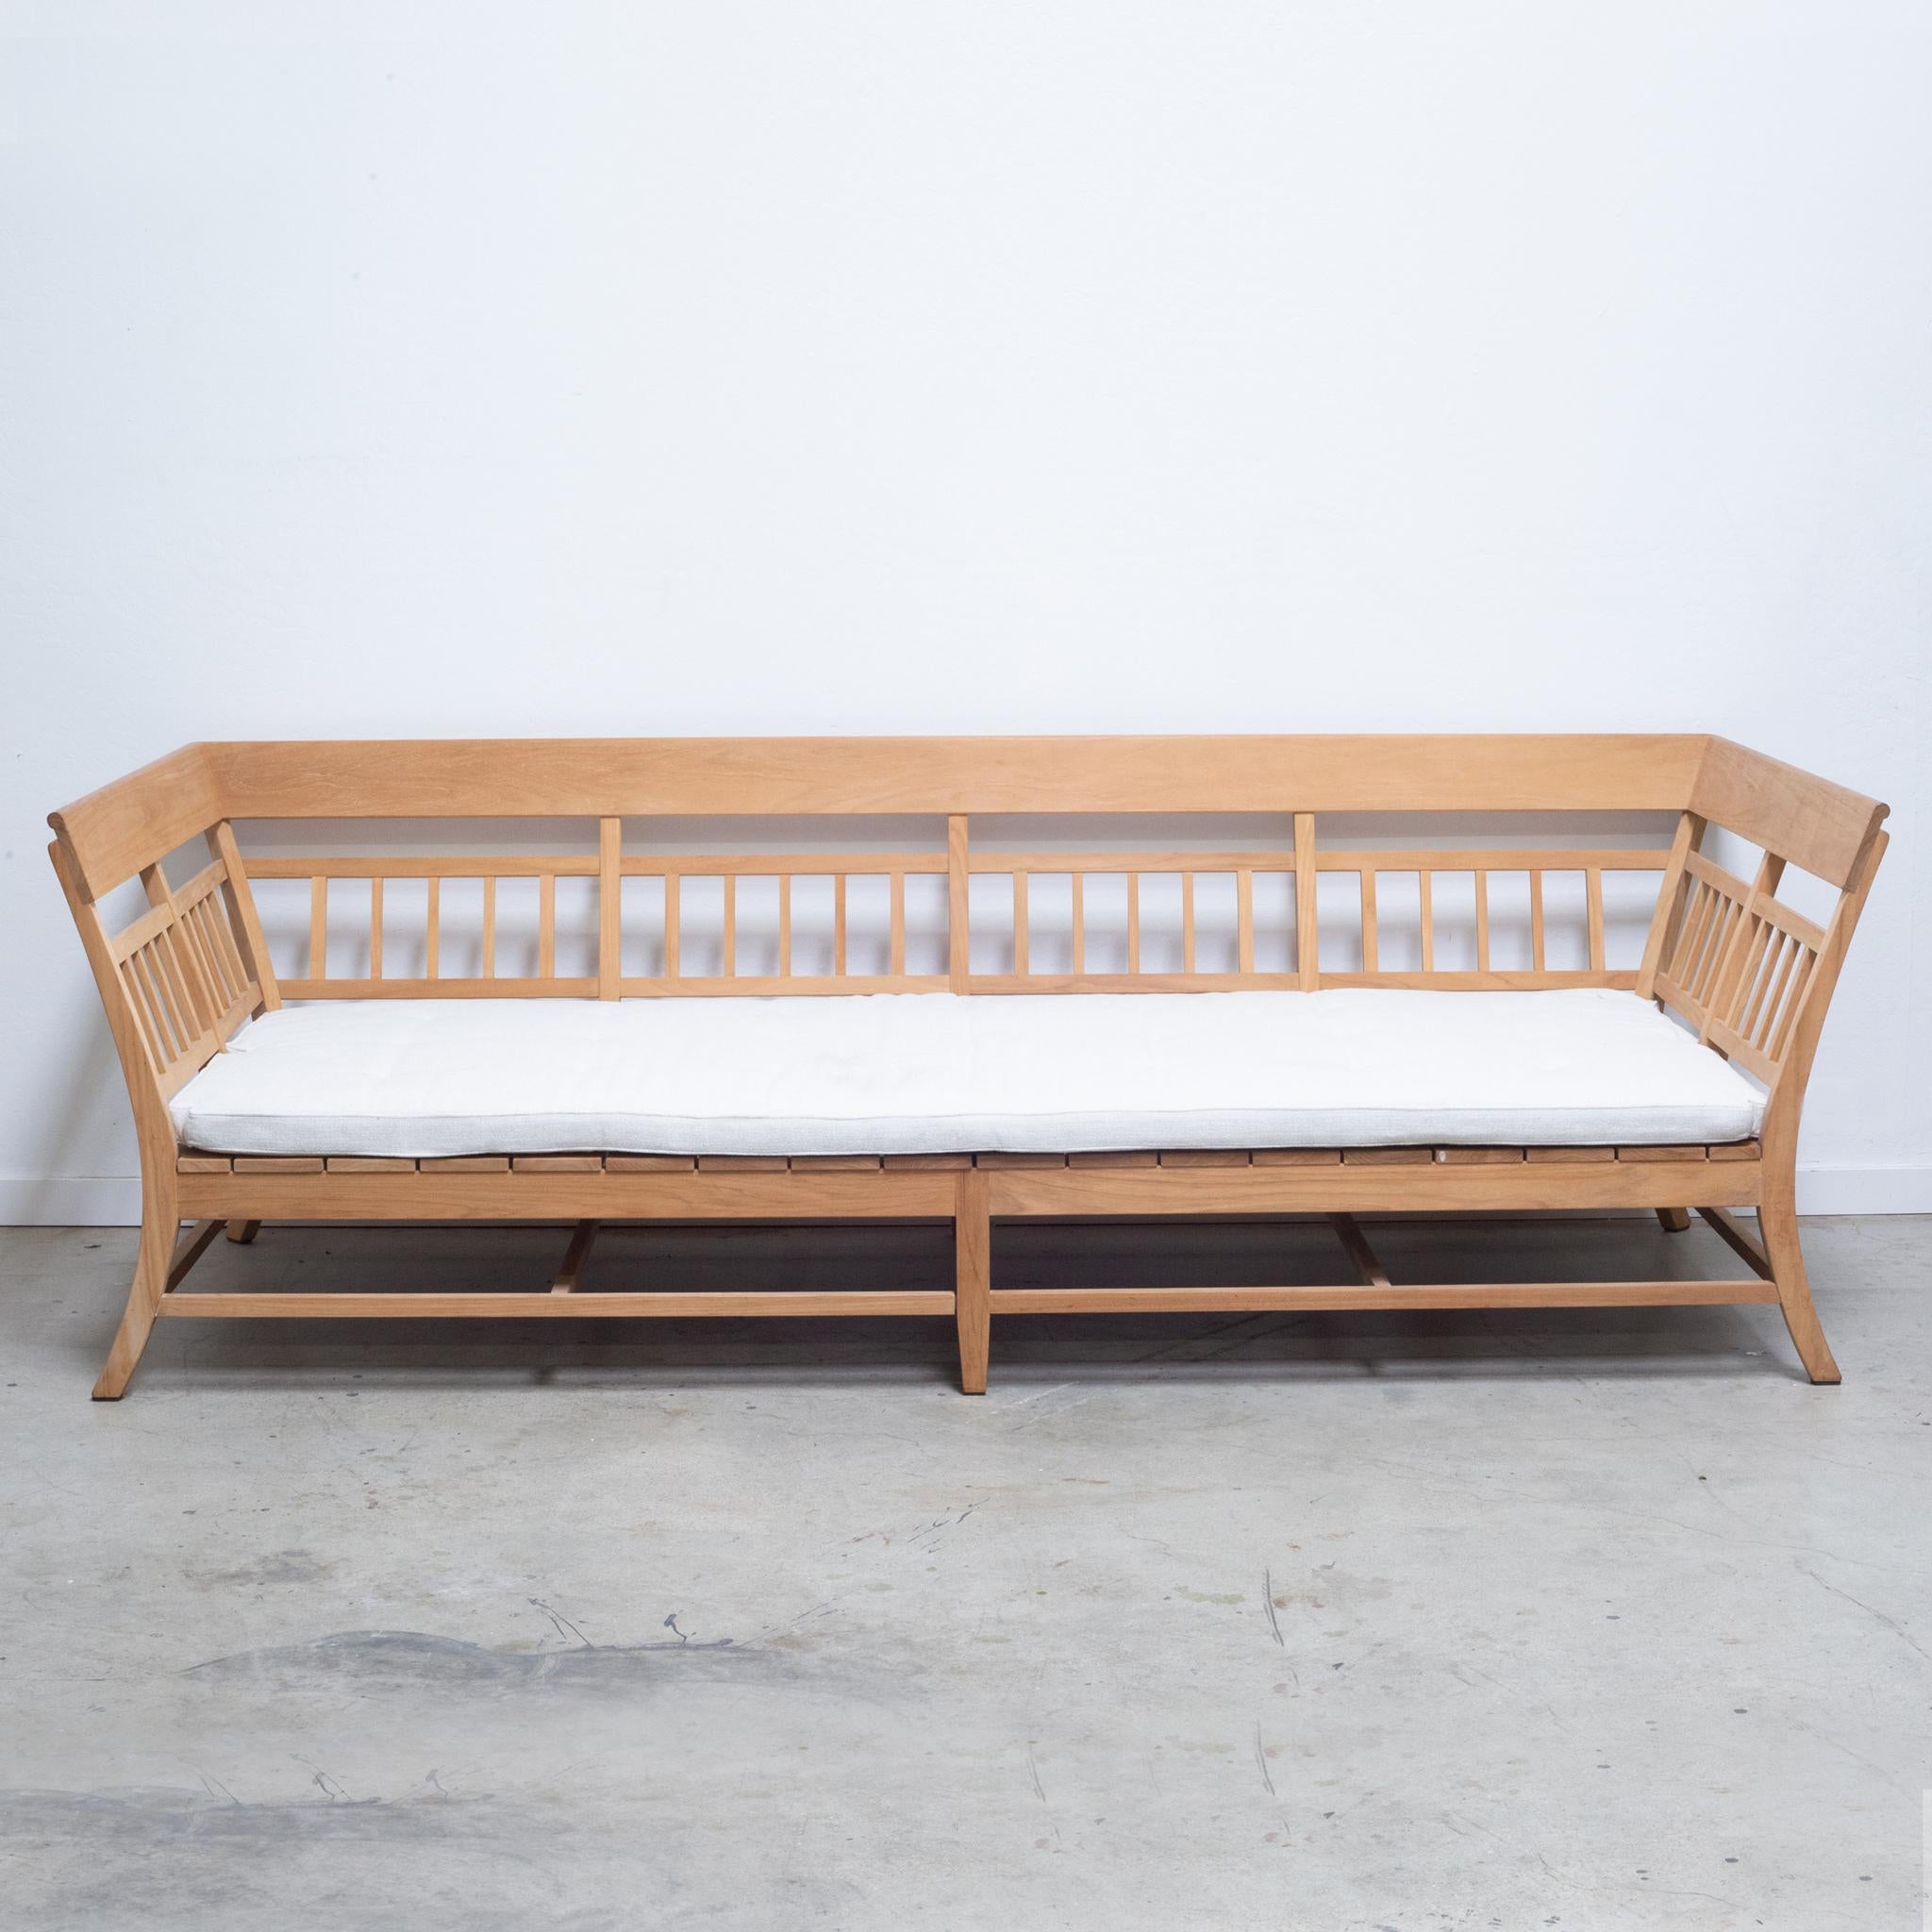 About

A large custom Munder Skiles patio daybed. Teak frame with upholstered fabric cushions. This size was custom made for the piece but was never used. 

Munder-Skiles is synonymous with the finest handmade exterior furniture.

Each chair,